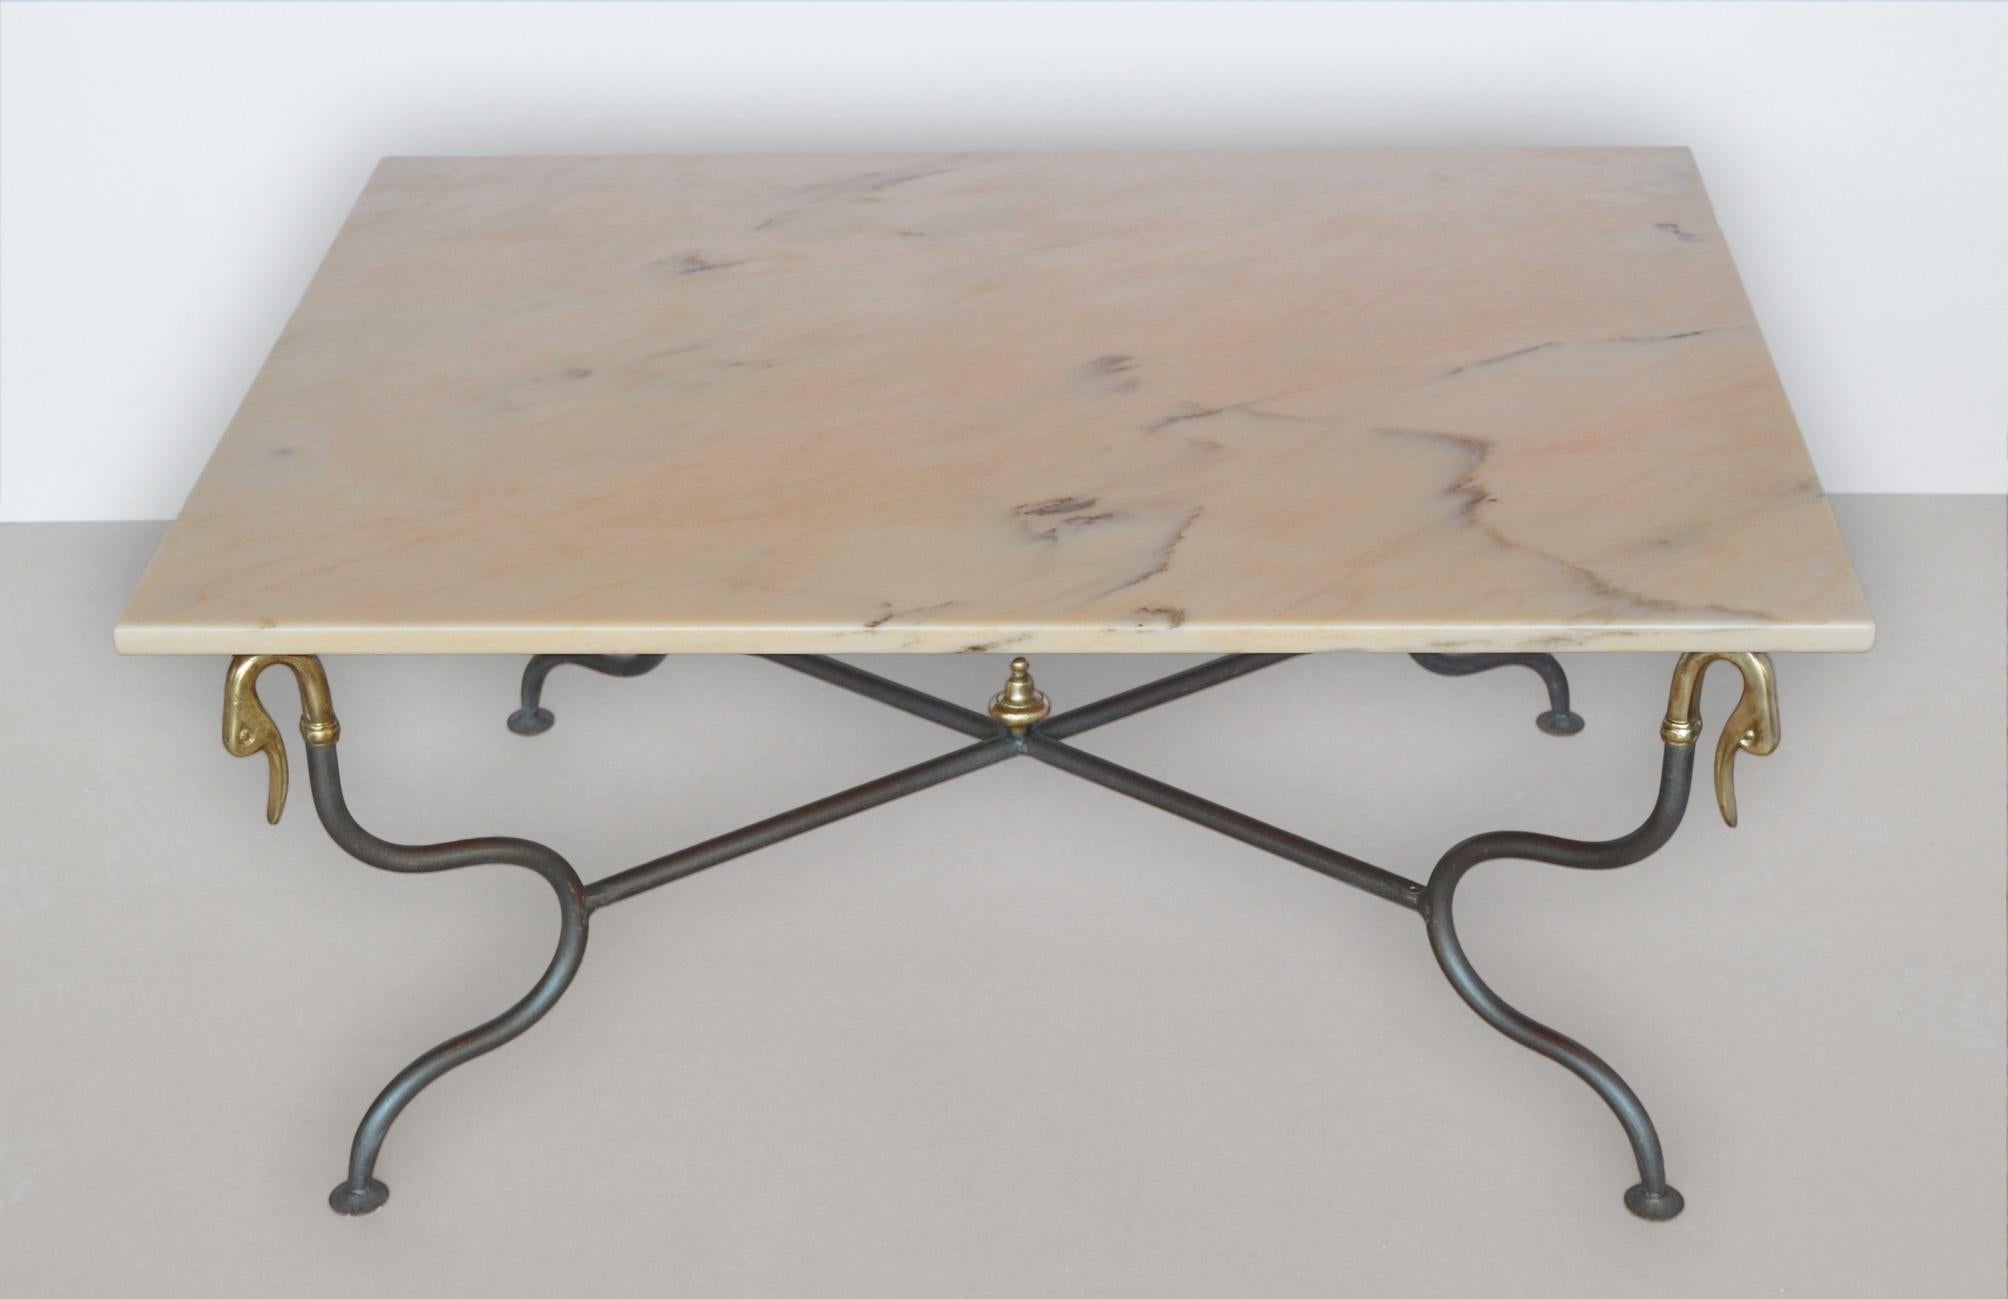 Coffee table  with Pink Portogallo marble  top and  wrought metal base . This coffee table will make a  stately addition to a modern decor. Its sleek silhouette is completed with a rusty finished metal ending in the corners with brass swan